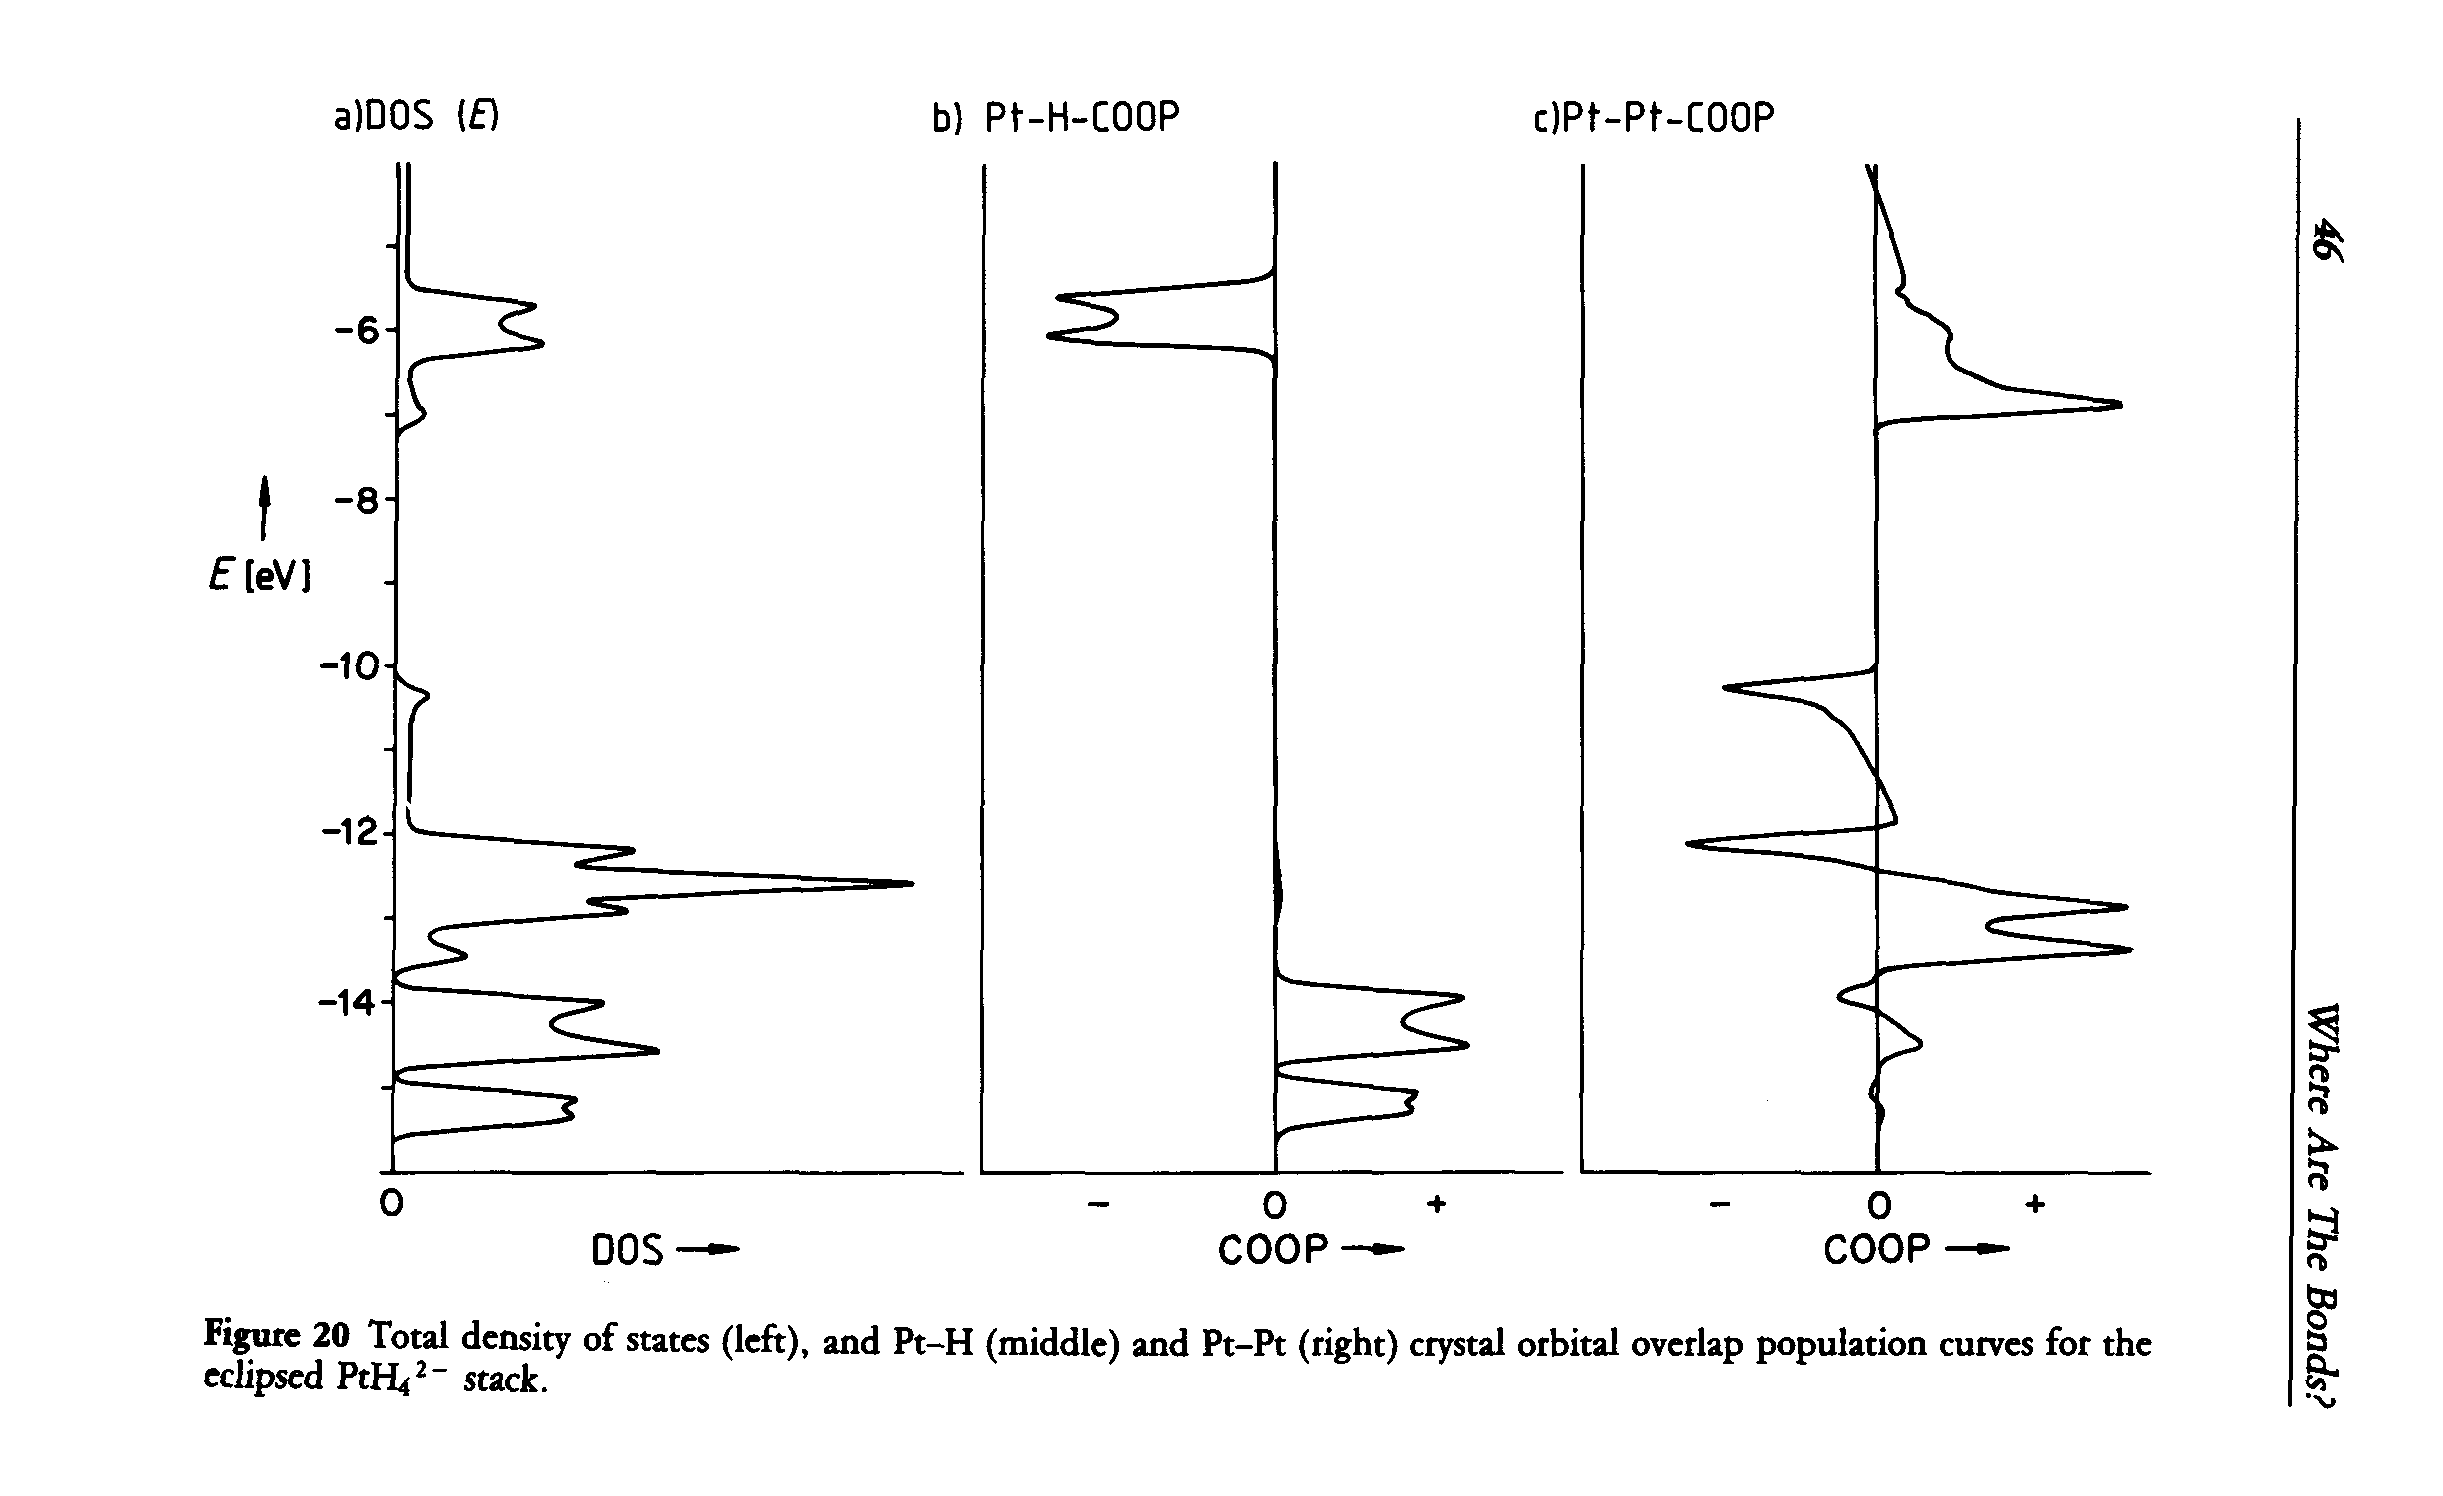 Figure 20 Total density of states (left), and Pt-H (middle) and Pt-Pt (right) crystal orbital overlap population curves for the eclipsed PtH,2- stack.